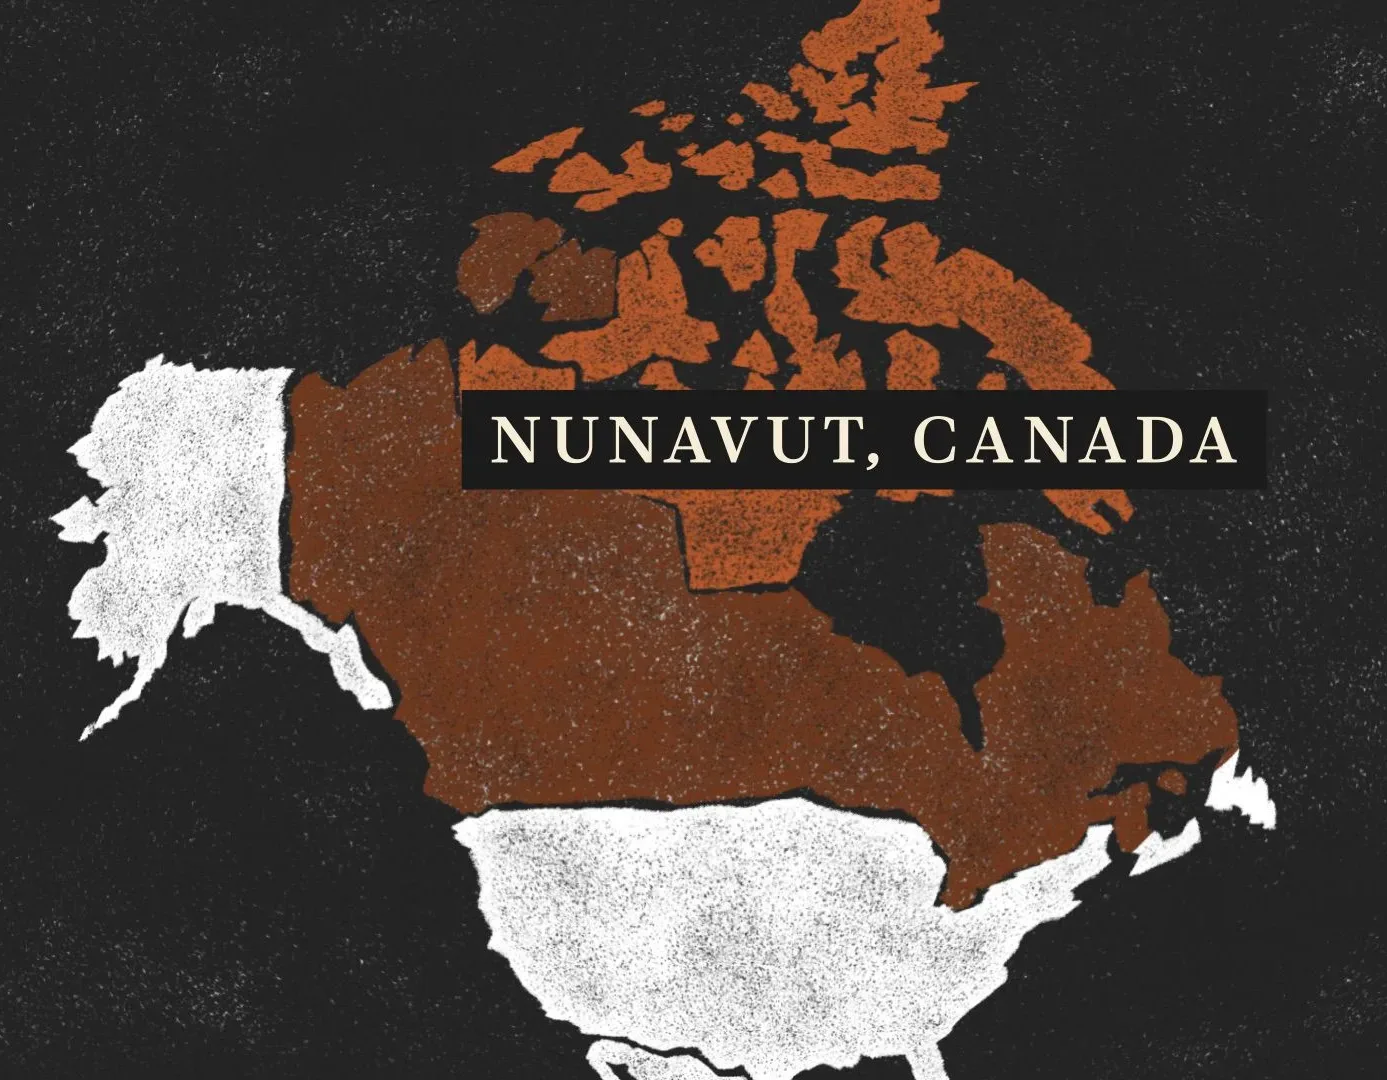 A graphic map of the United States and Canada in white and shades of brown. The words “Nunavut, Canada” are visible.